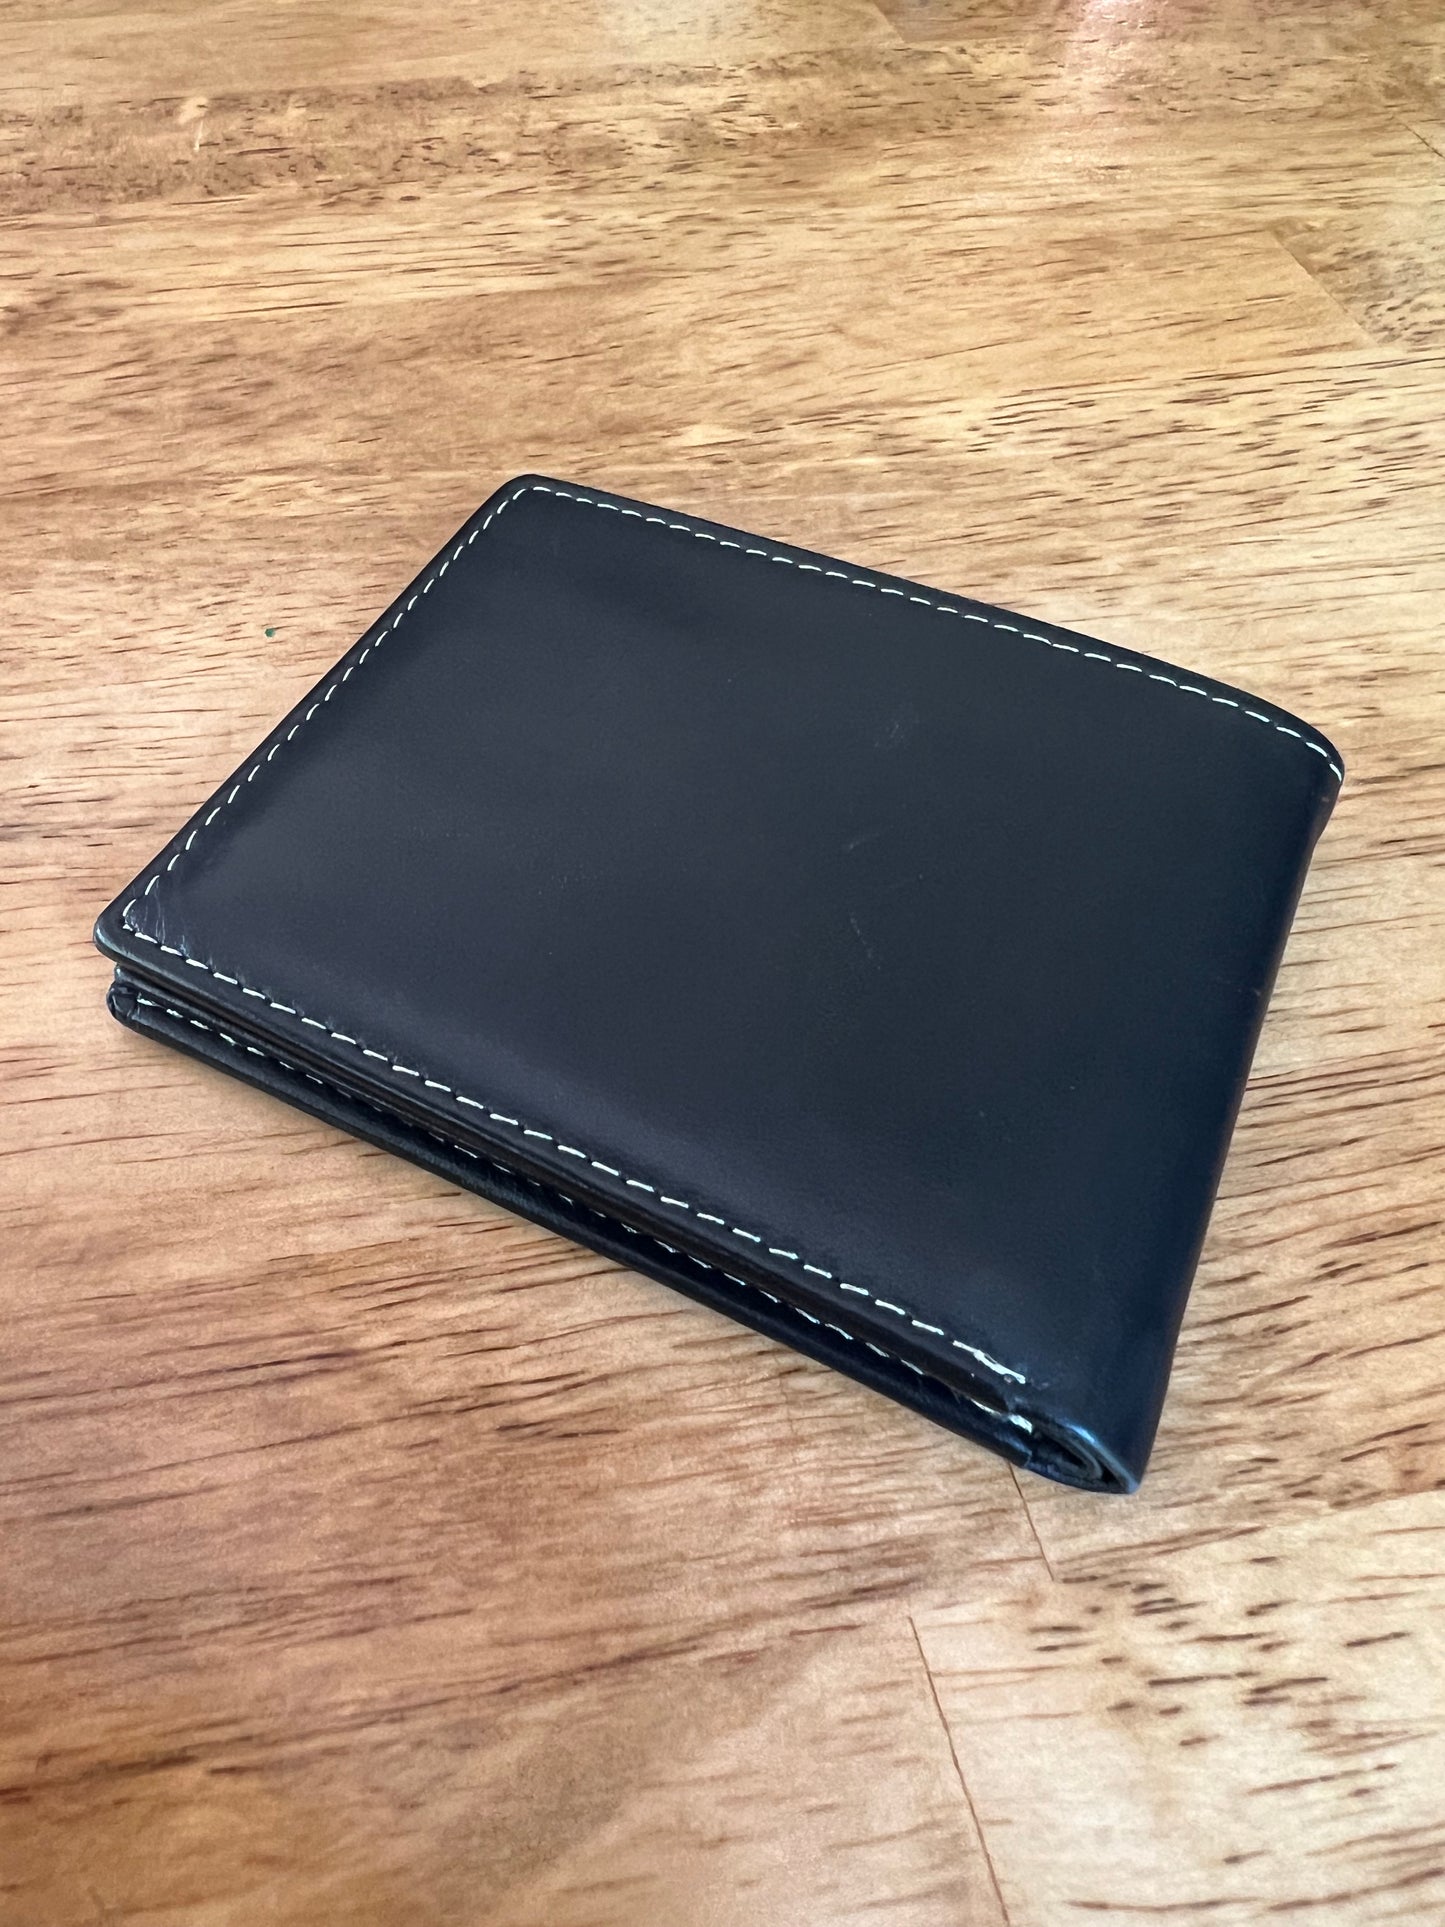 Black Leather Timberland Wallet